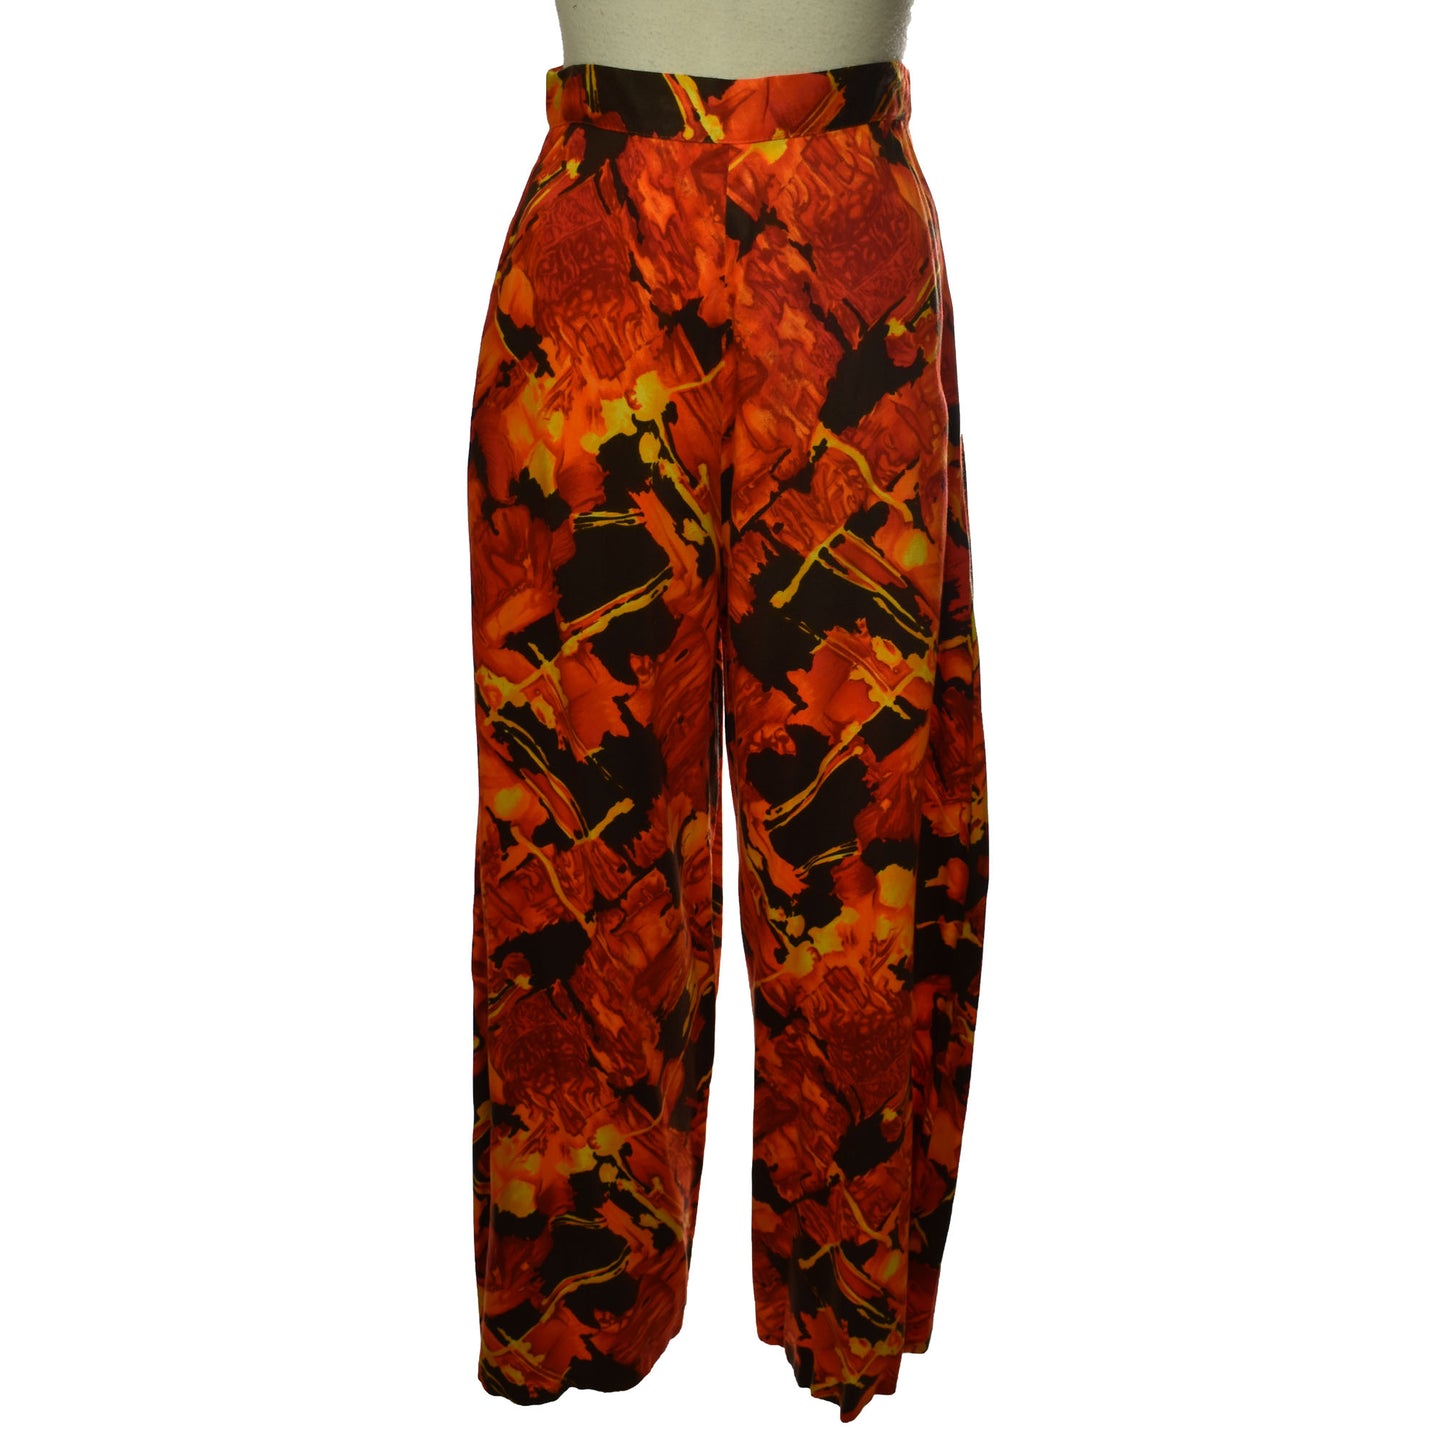 Vintage 60s 70s Alice By California Pant Set - Printed Pants and Top